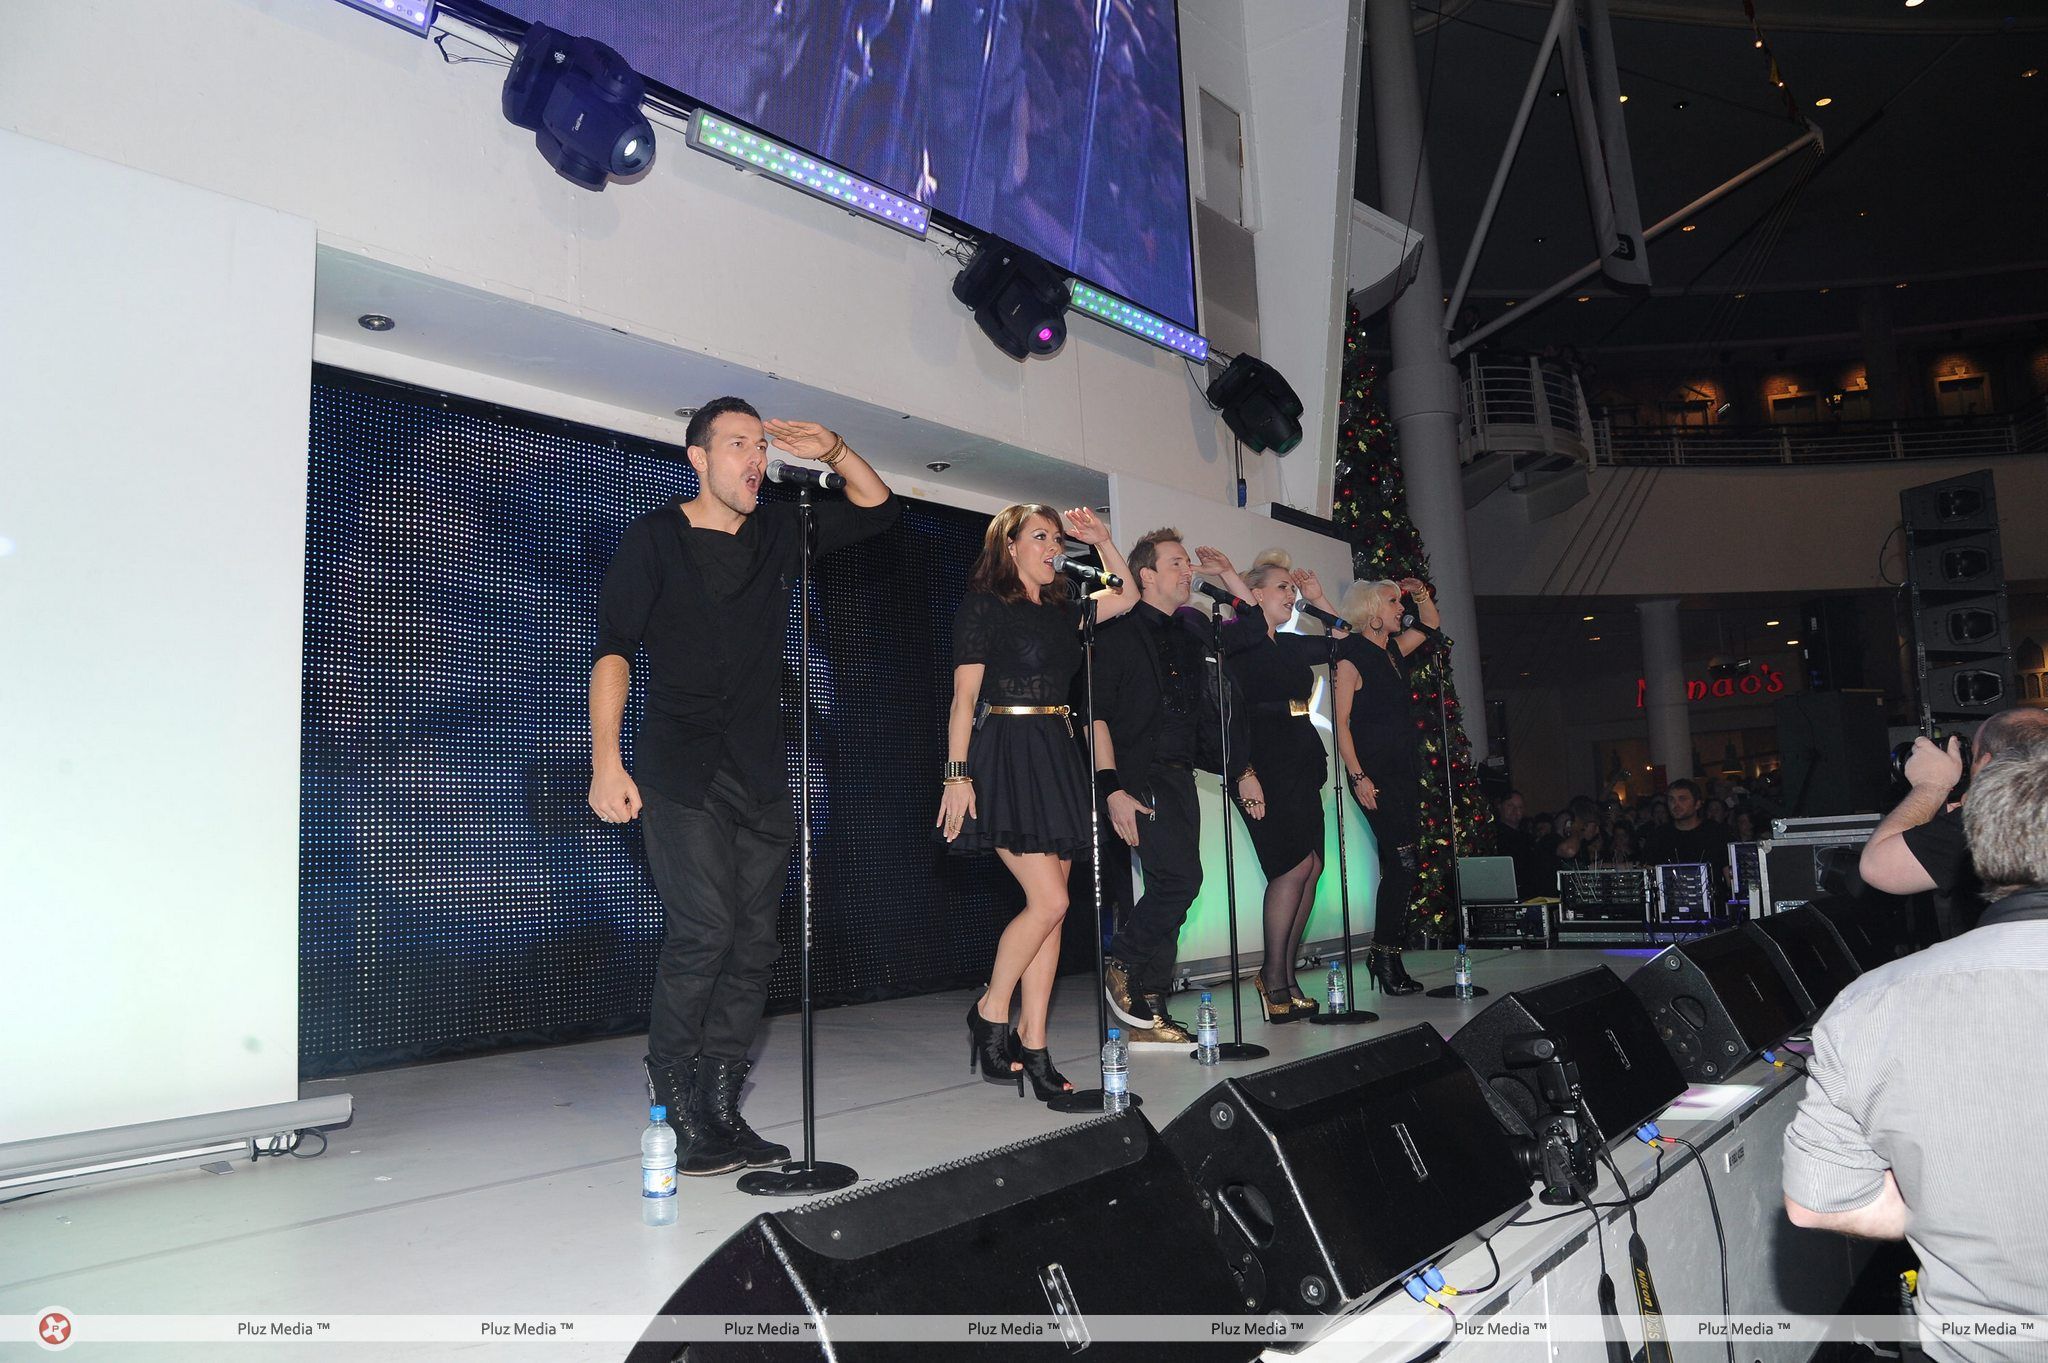 Steps' performs live at the Trafford centre in Manchester | Picture 111525